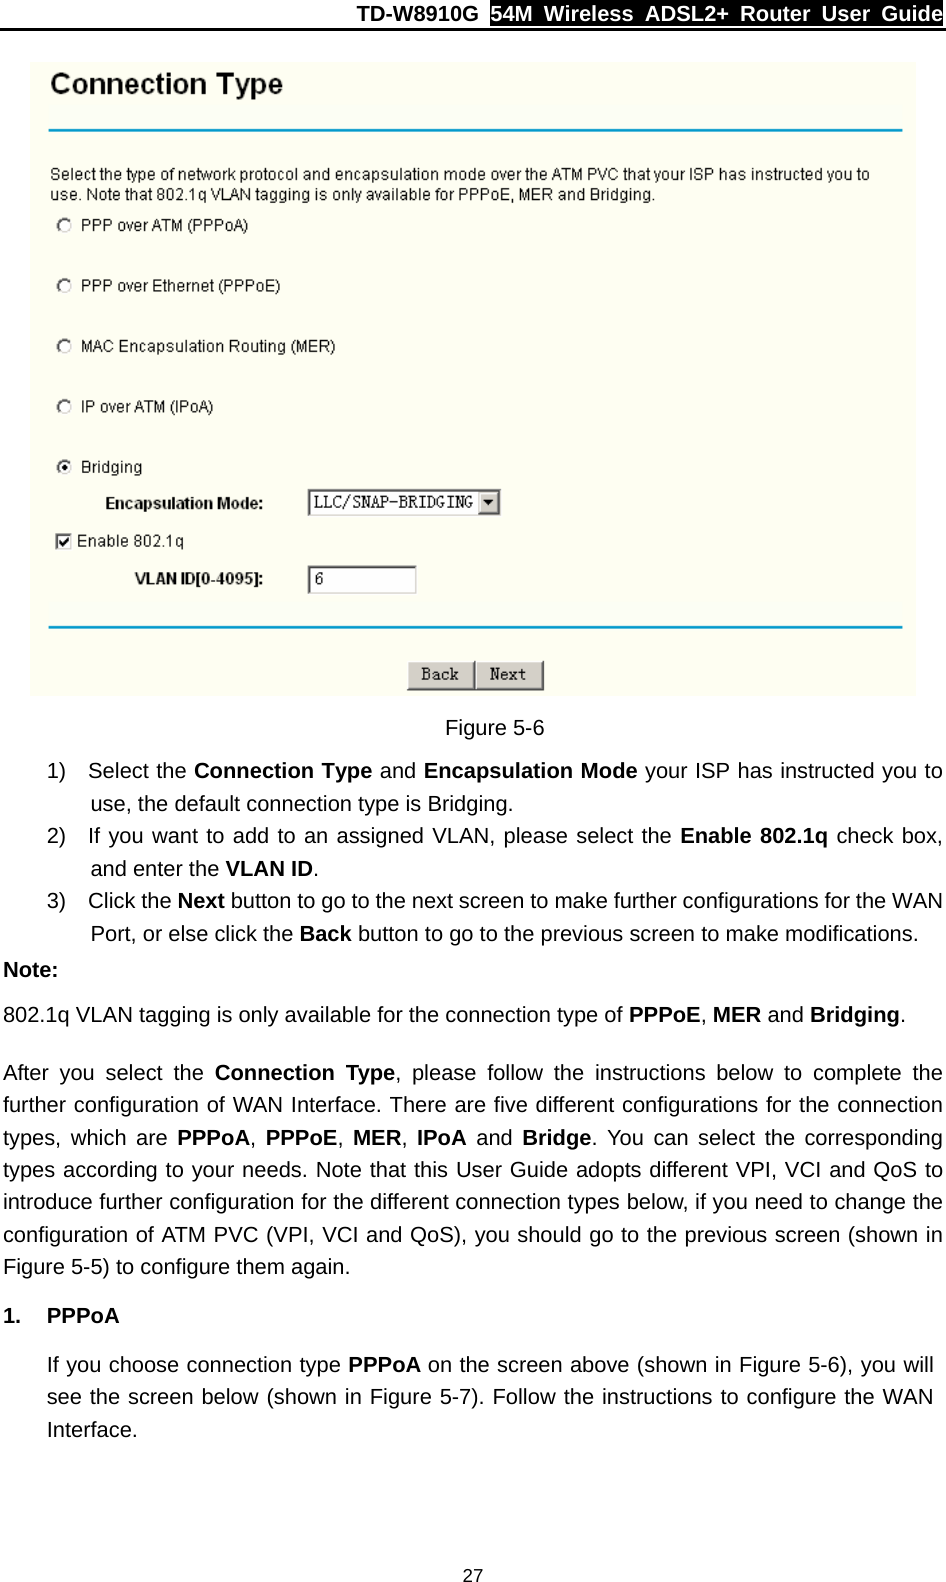 TD-W8910G  54M Wireless ADSL2+ Router User Guide  27 Figure 5-6 1) Select the Connection Type and Encapsulation Mode your ISP has instructed you to use, the default connection type is Bridging. 2)  If you want to add to an assigned VLAN, please select the Enable 802.1q check box, and enter the VLAN ID. 3) Click the Next button to go to the next screen to make further configurations for the WAN Port, or else click the Back button to go to the previous screen to make modifications. Note: 802.1q VLAN tagging is only available for the connection type of PPPoE, MER and Bridging. After you select the Connection Type, please follow the instructions below to complete the further configuration of WAN Interface. There are five different configurations for the connection types, which are PPPoA, PPPoE,  MER,  IPoA and Bridge. You can select the corresponding types according to your needs. Note that this User Guide adopts different VPI, VCI and QoS to introduce further configuration for the different connection types below, if you need to change the configuration of ATM PVC (VPI, VCI and QoS), you should go to the previous screen (shown in Figure 5-5) to configure them again. 1. PPPoA If you choose connection type PPPoA on the screen above (shown in Figure 5-6), you will see the screen below (shown in Figure 5-7). Follow the instructions to configure the WAN Interface. 